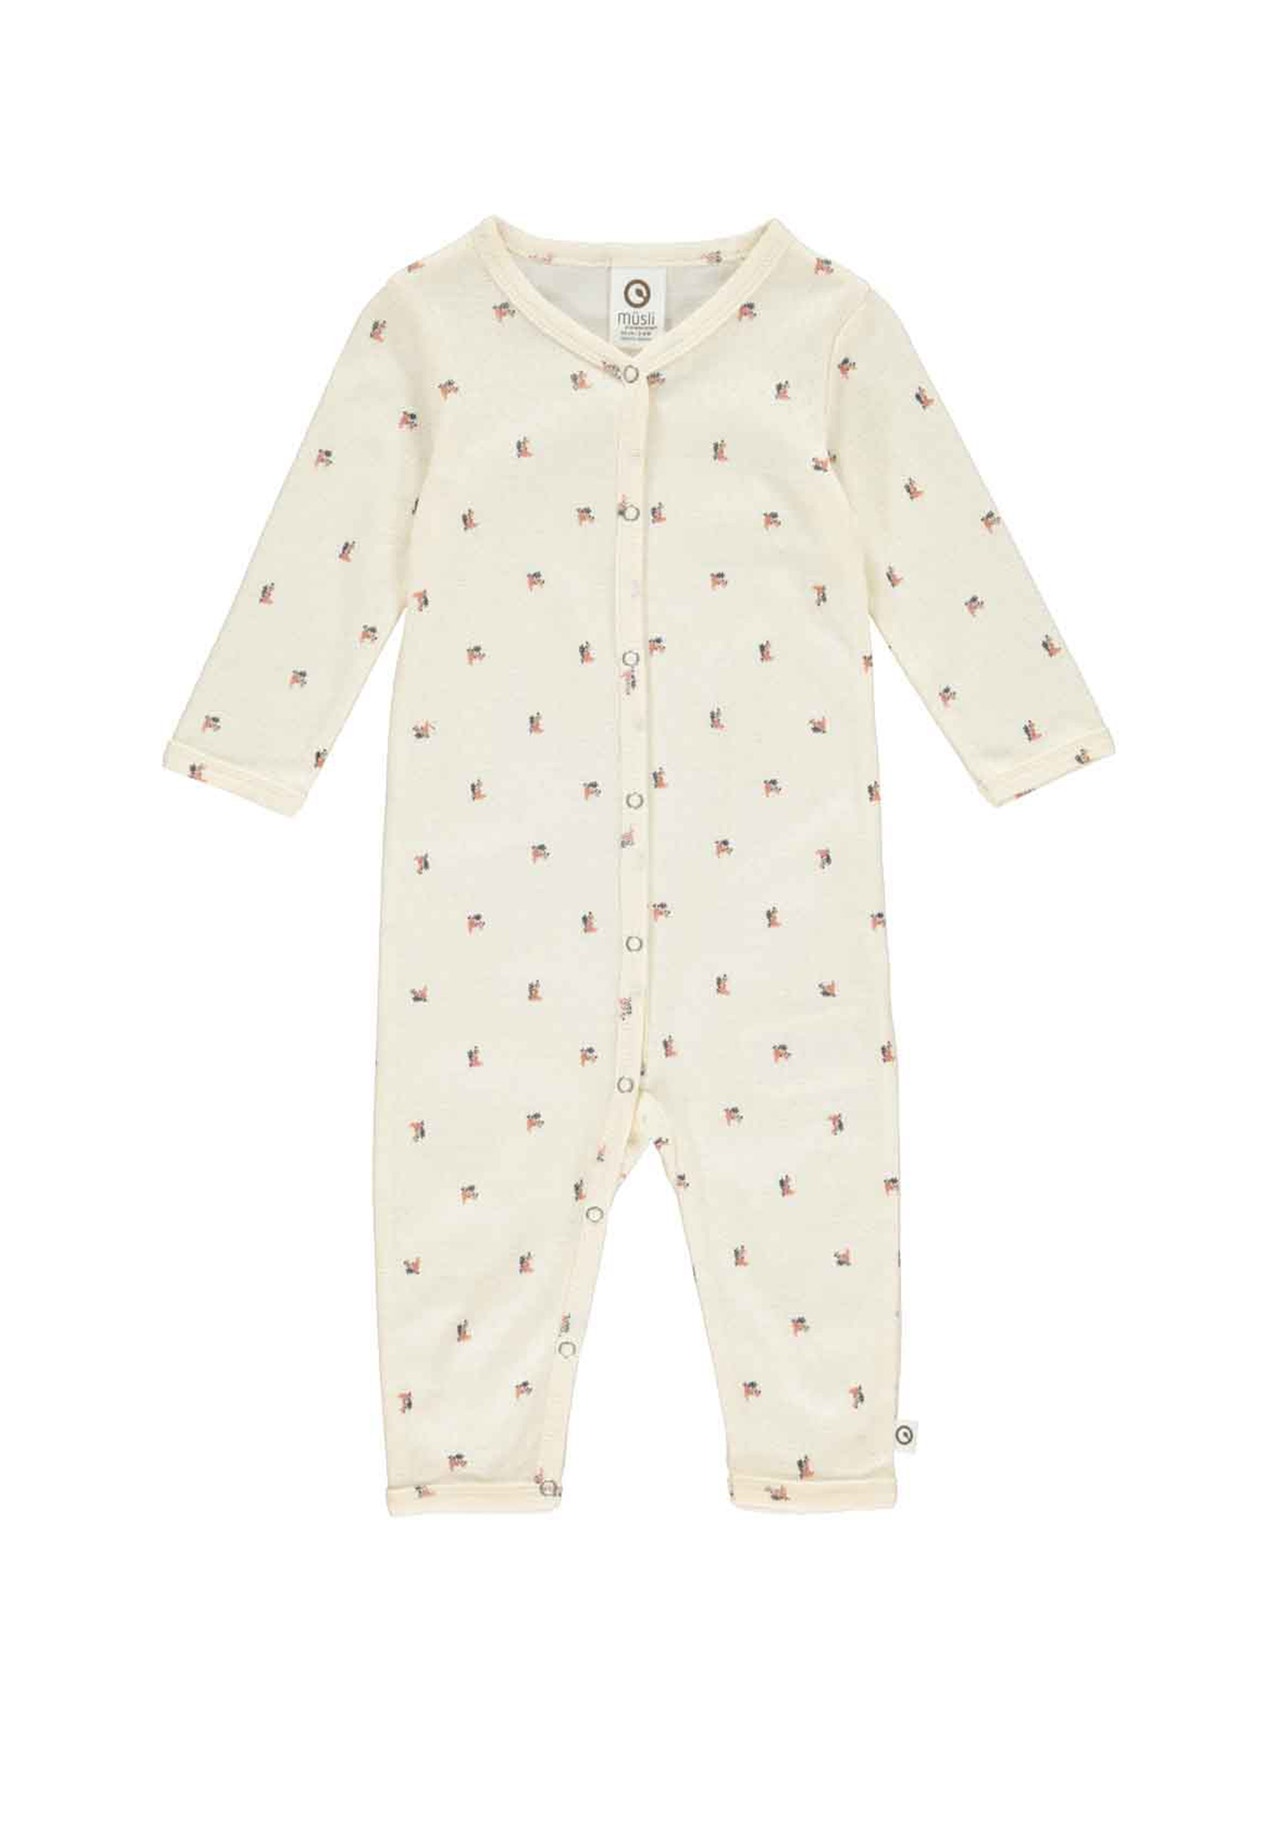 MAMA.LICIOUS Baby one-piece suit -Buttercream/Rose - 1584061300